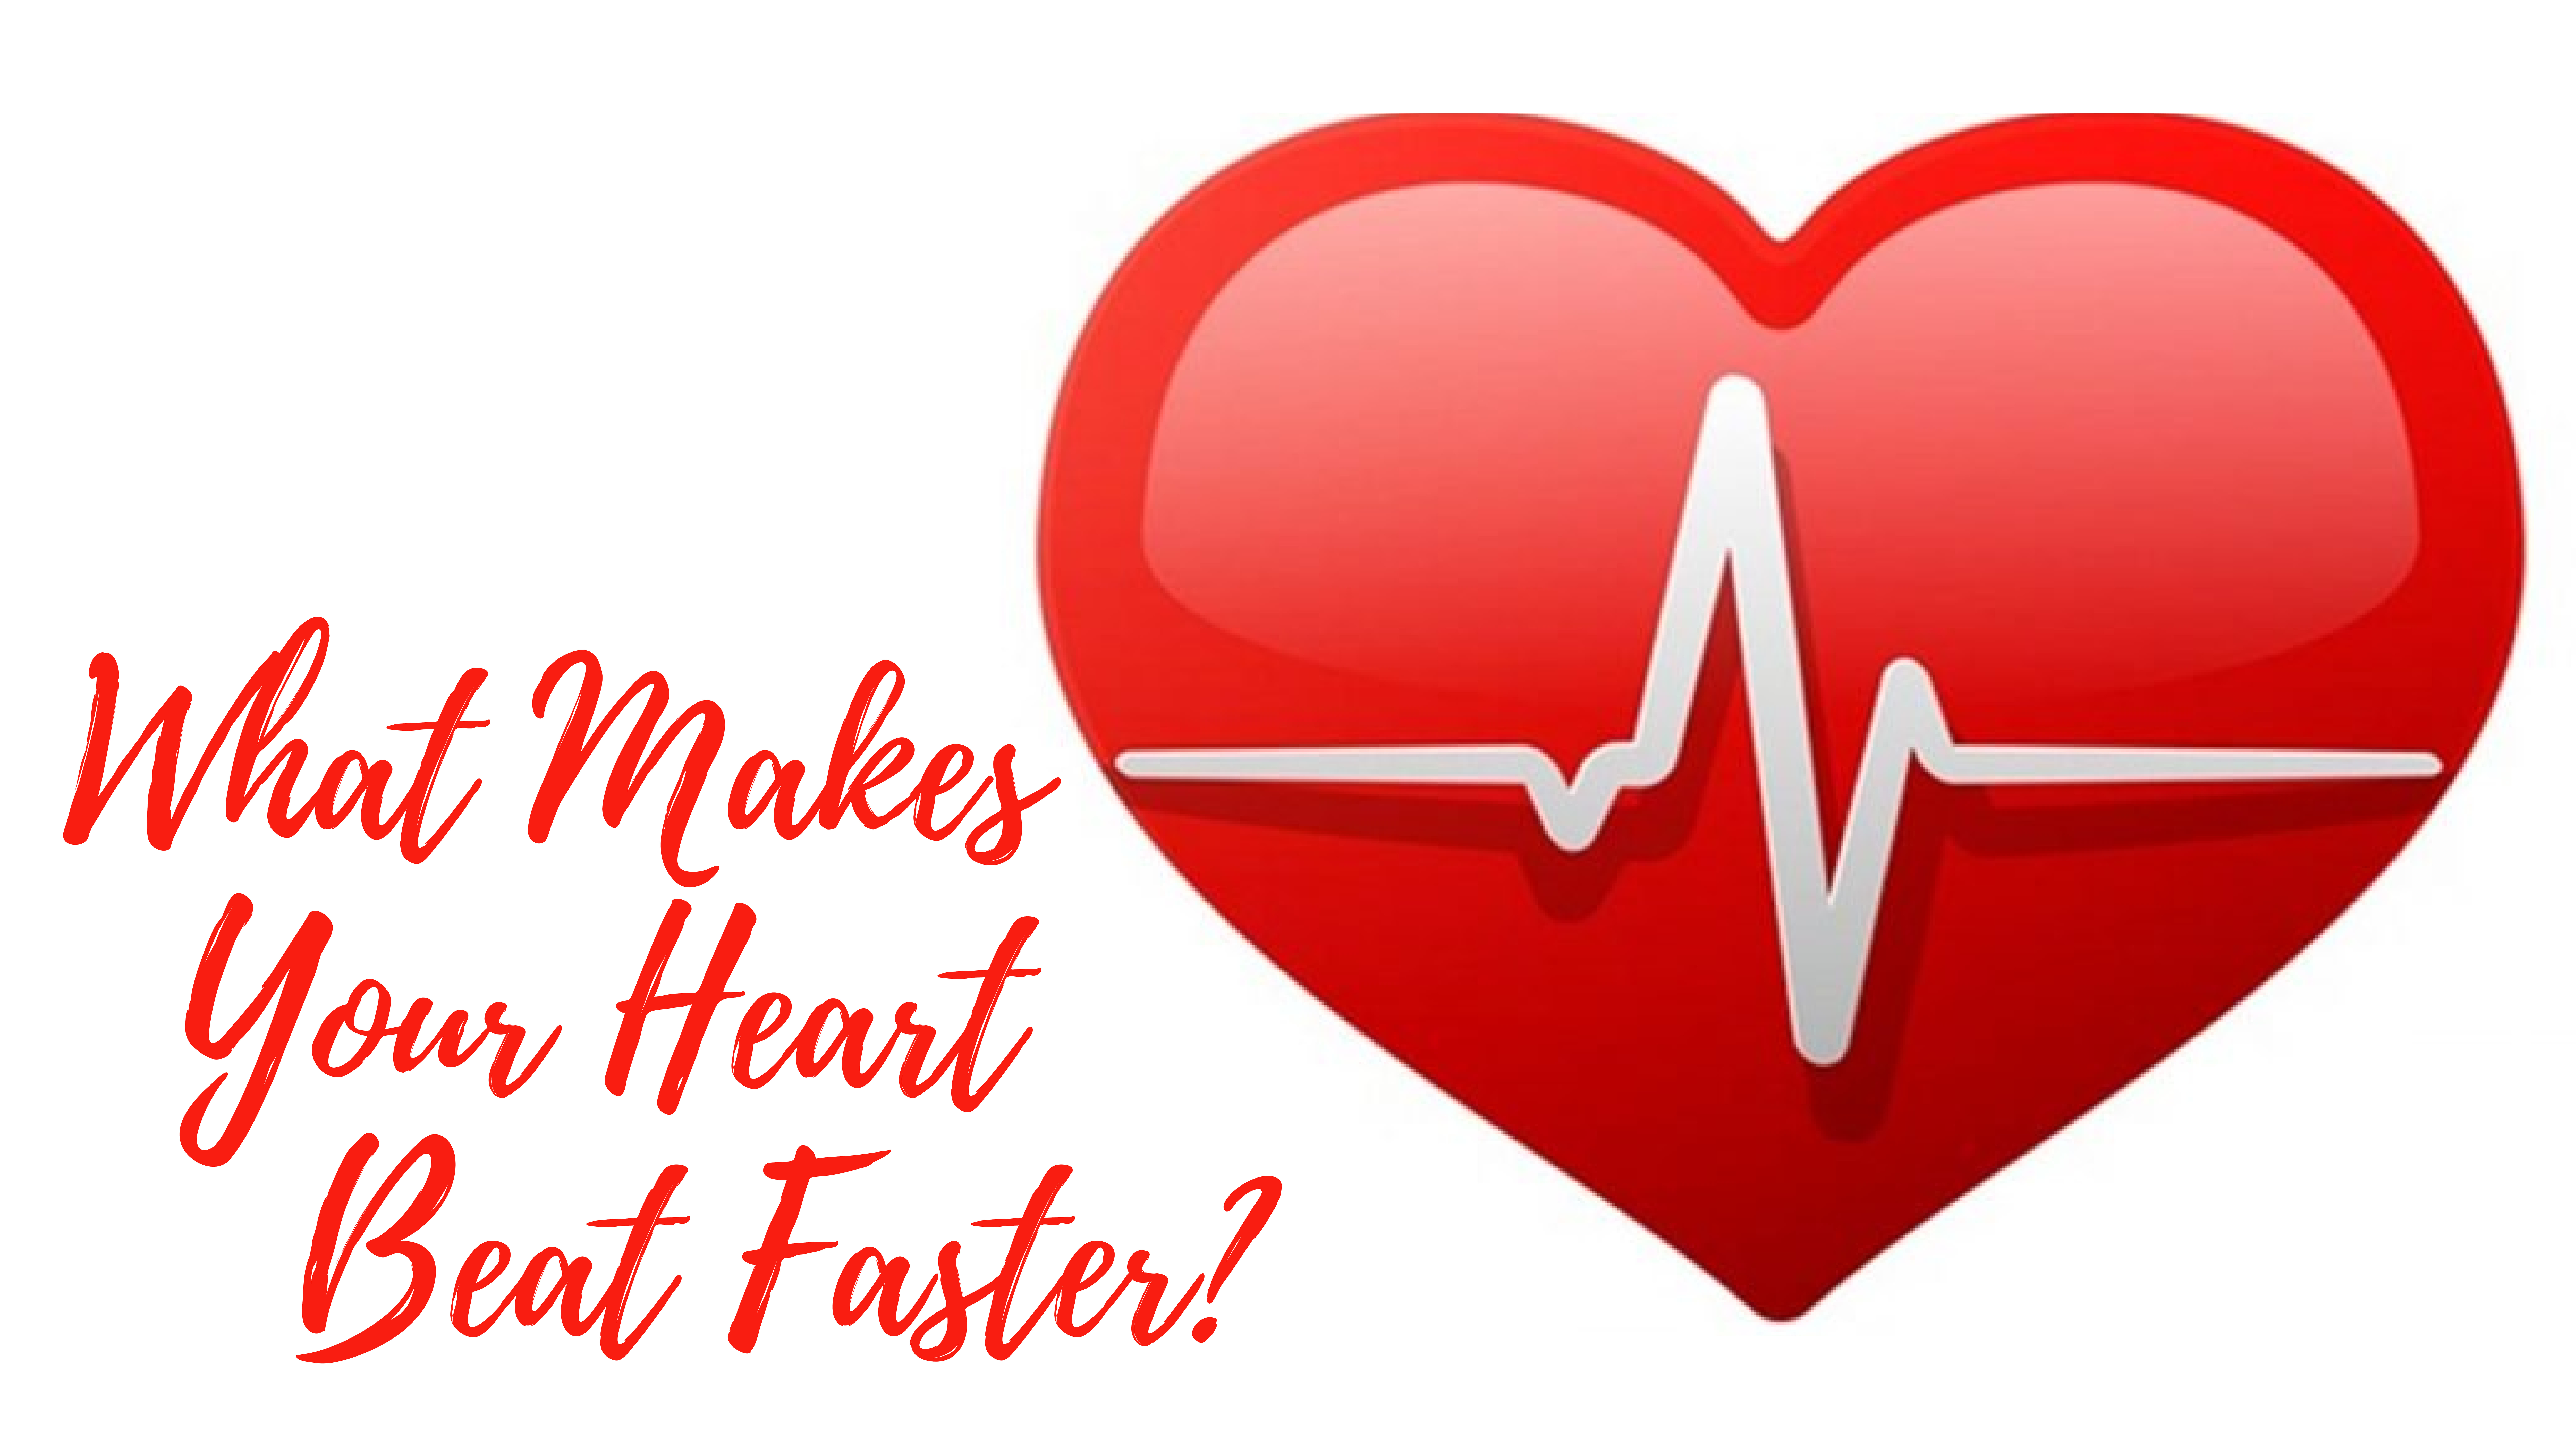 What Makes Your Heart Beat Faster?